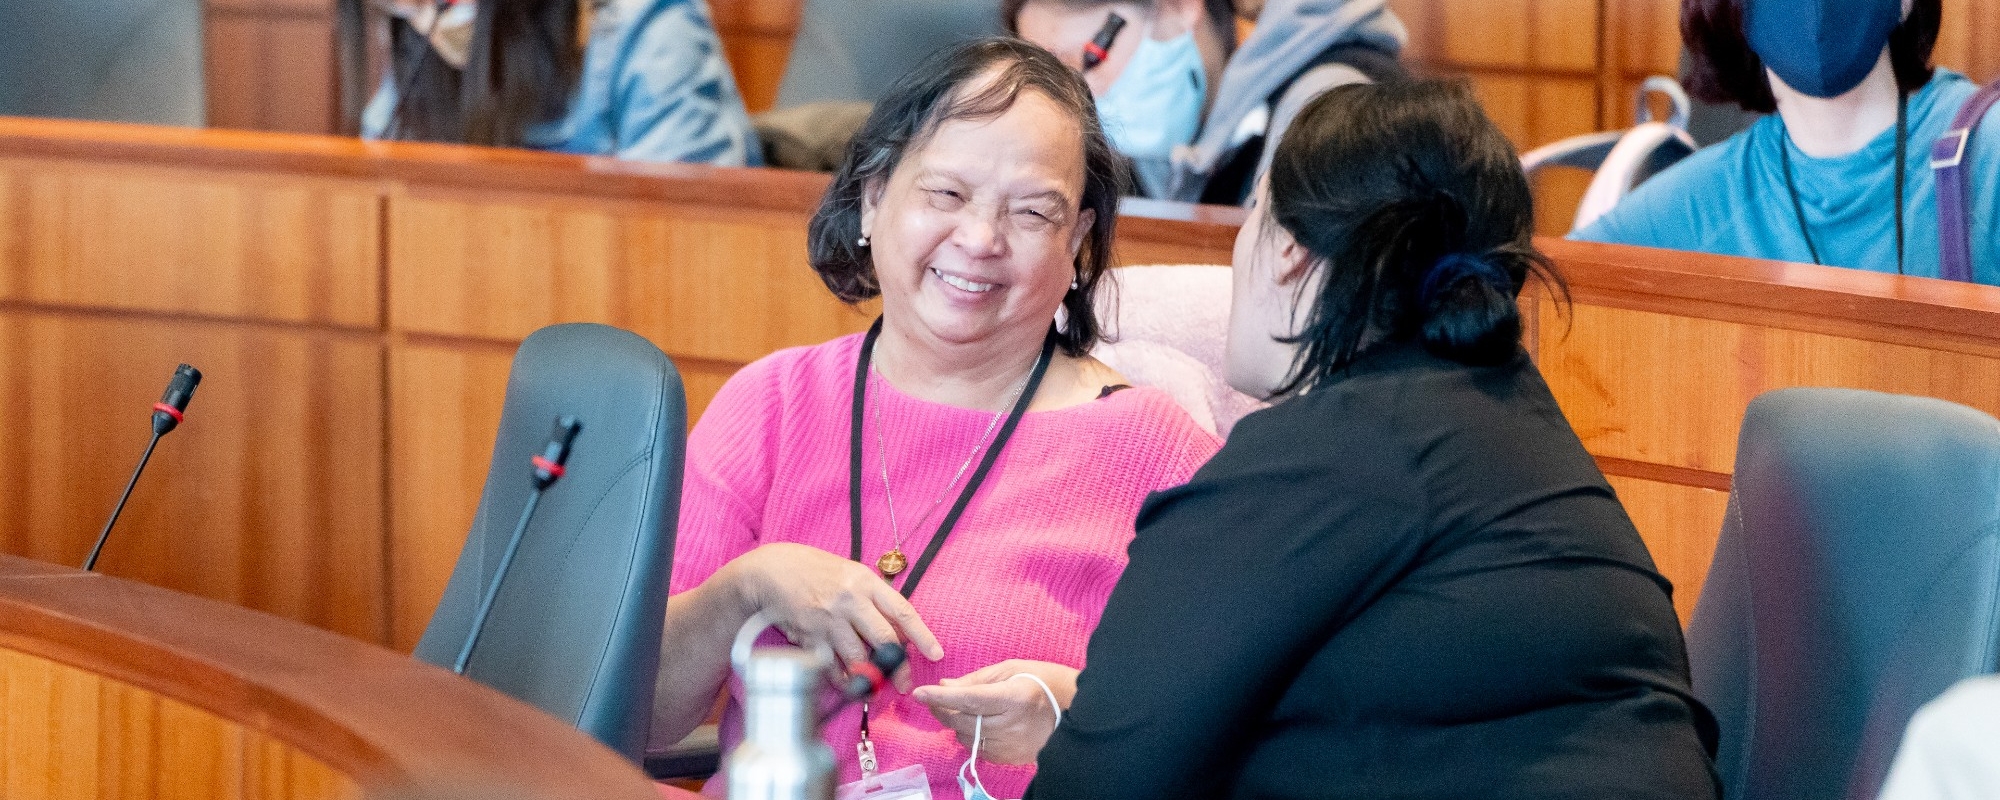 Two participants are seen chatting and smiling during a dialogue at the Asia Pacific Hall.